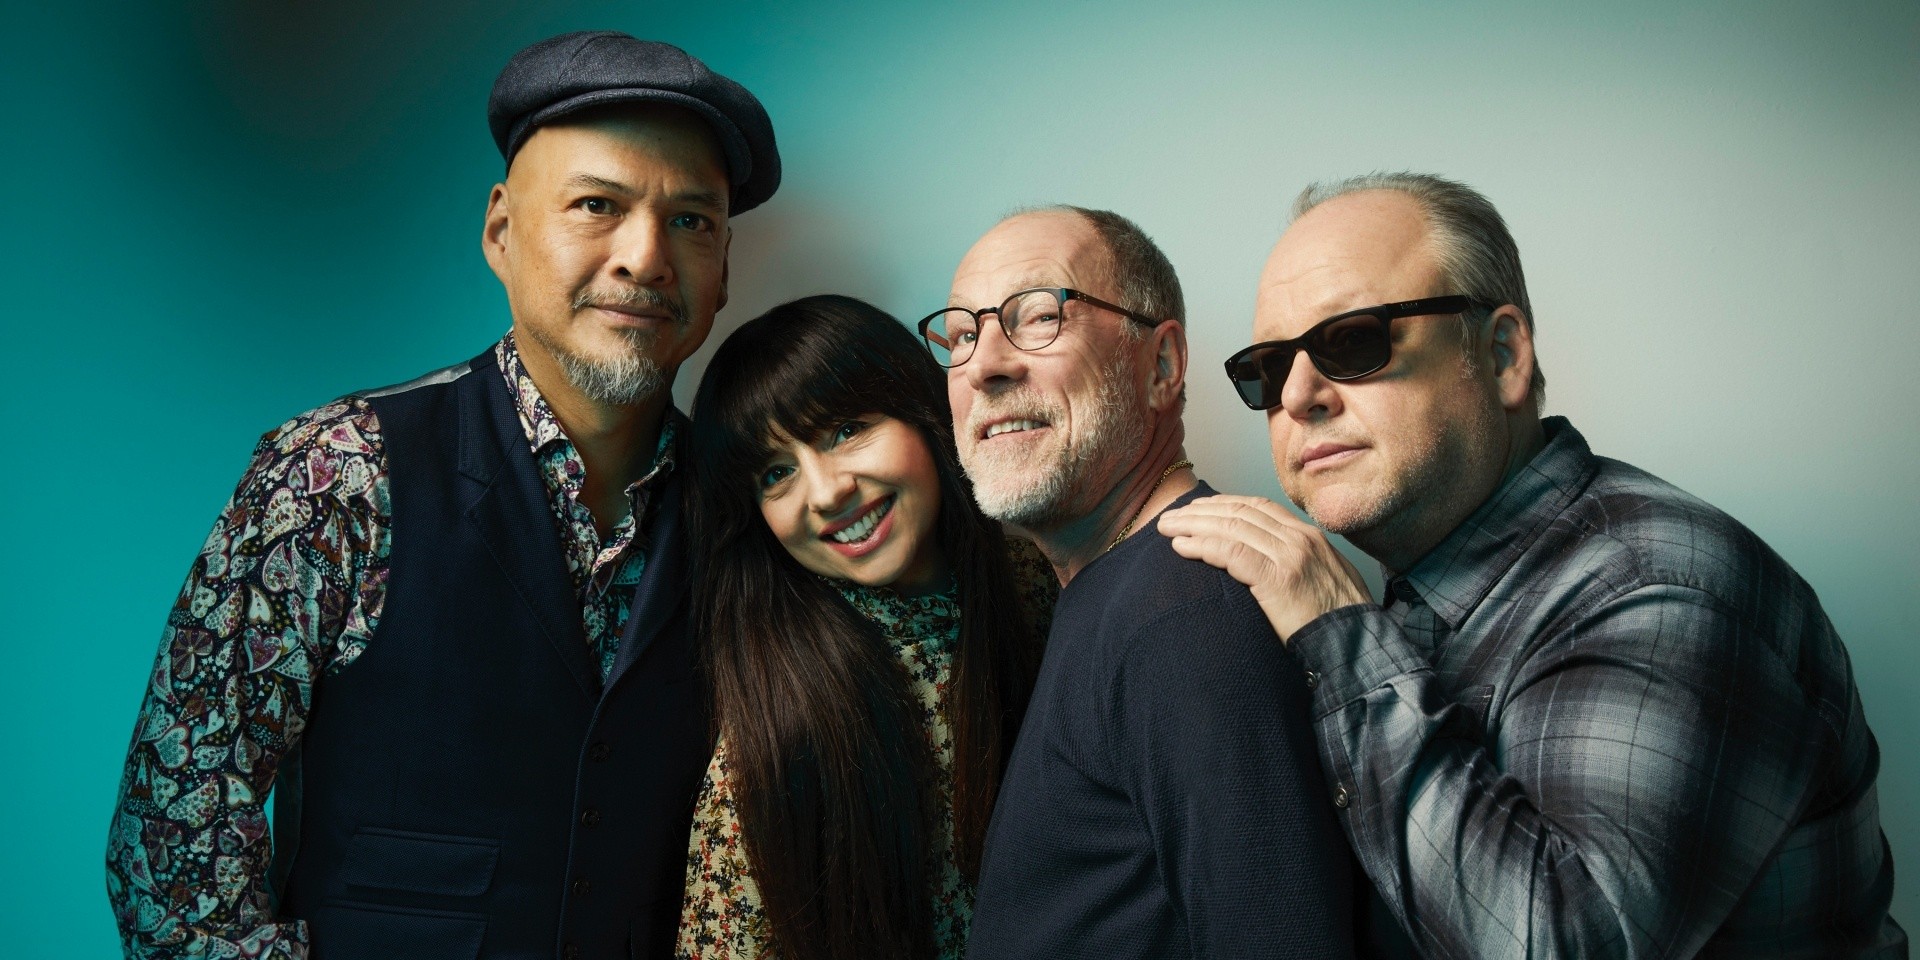 PIXIES releases second single, ‘Catfish Kate’, from upcoming album – watch